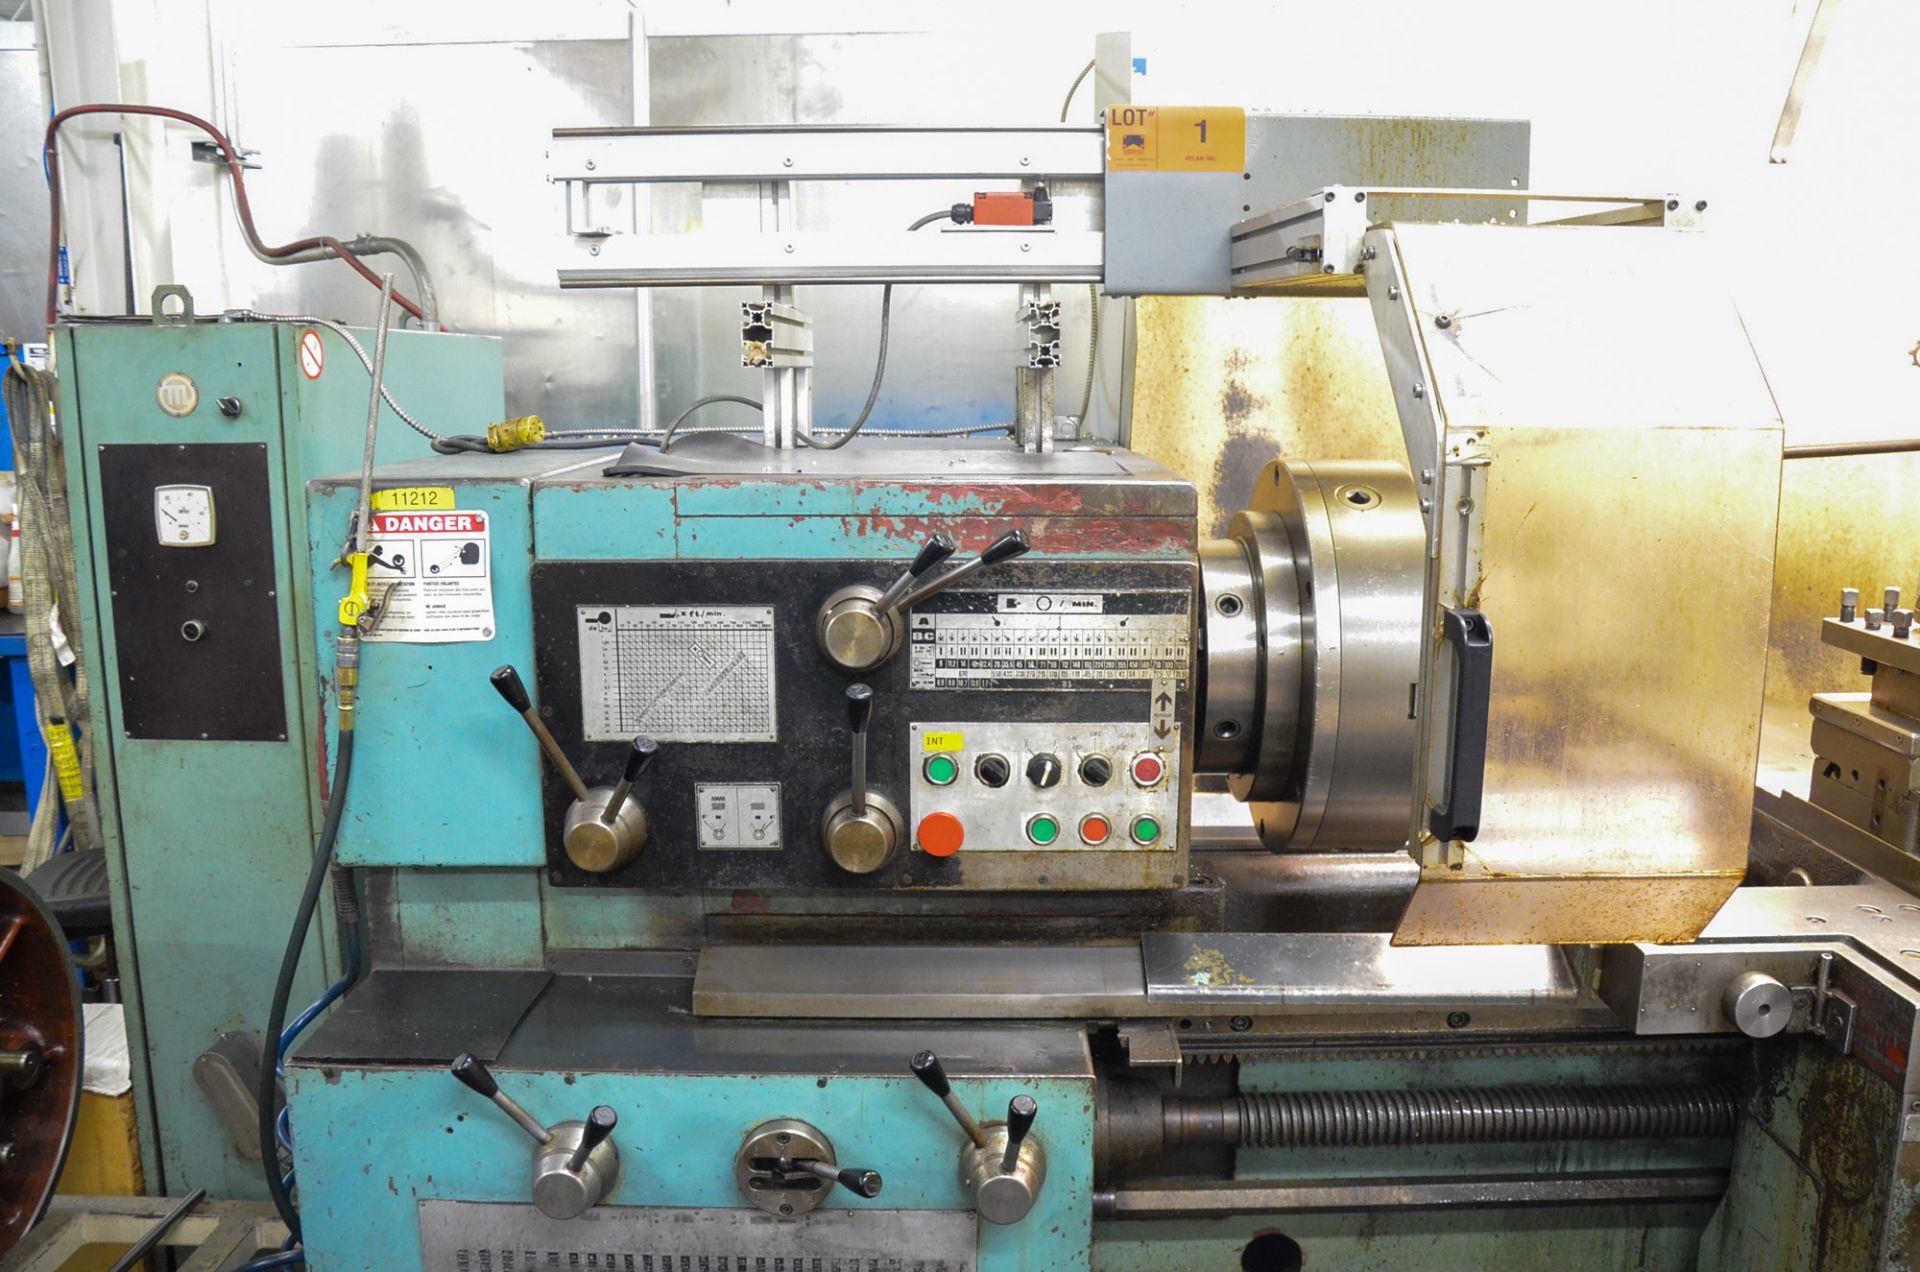 TOS SUS63 ENGINE LATHE WITH 28" SWING, 85" BETWEEN CENTERS, 19.5" 3-JAW CHUCK, SPEEDS TO 1,120 - Image 7 of 15